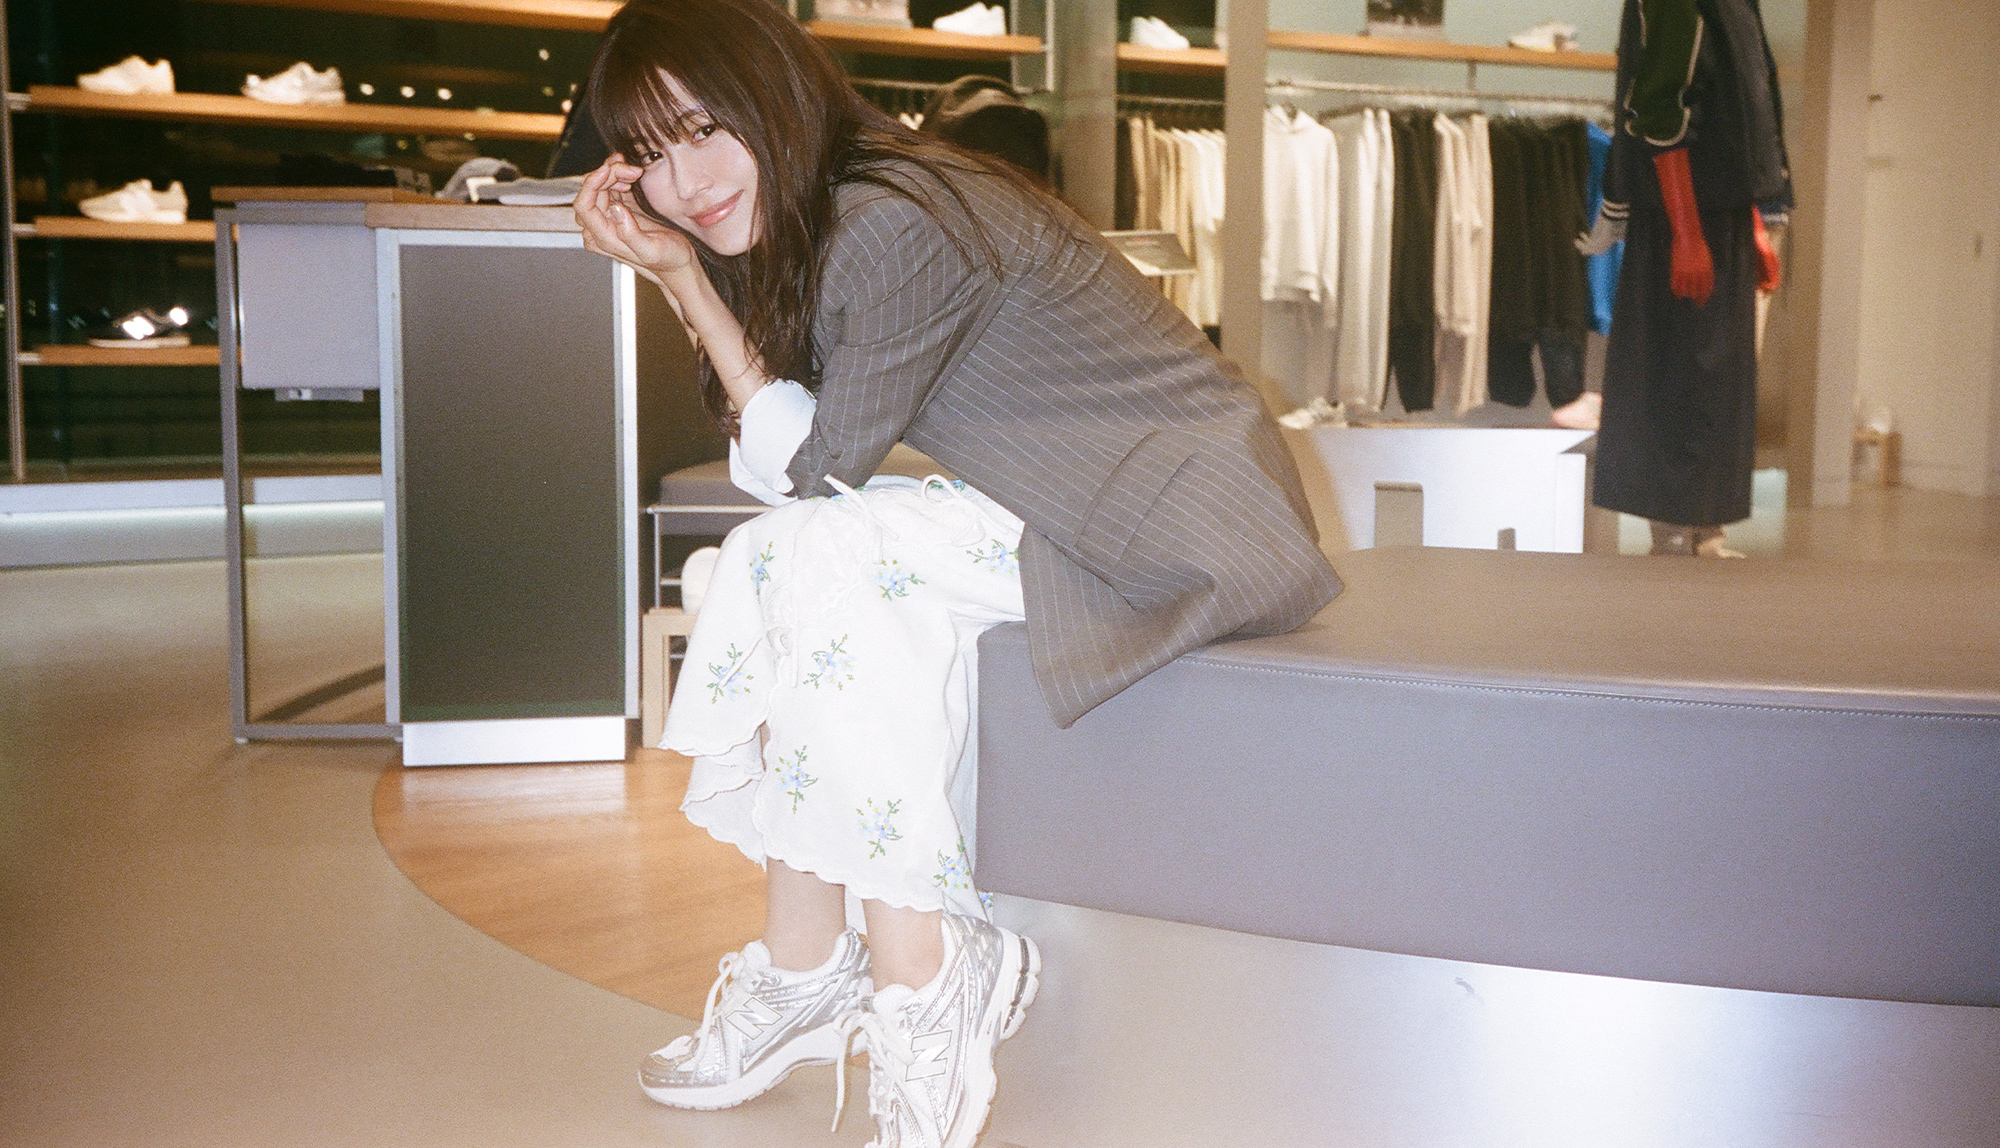 Kasumi Arimura x New Balance | Know new values. To a place where communities are born | Parco Cruise| PARCO (Parco) 